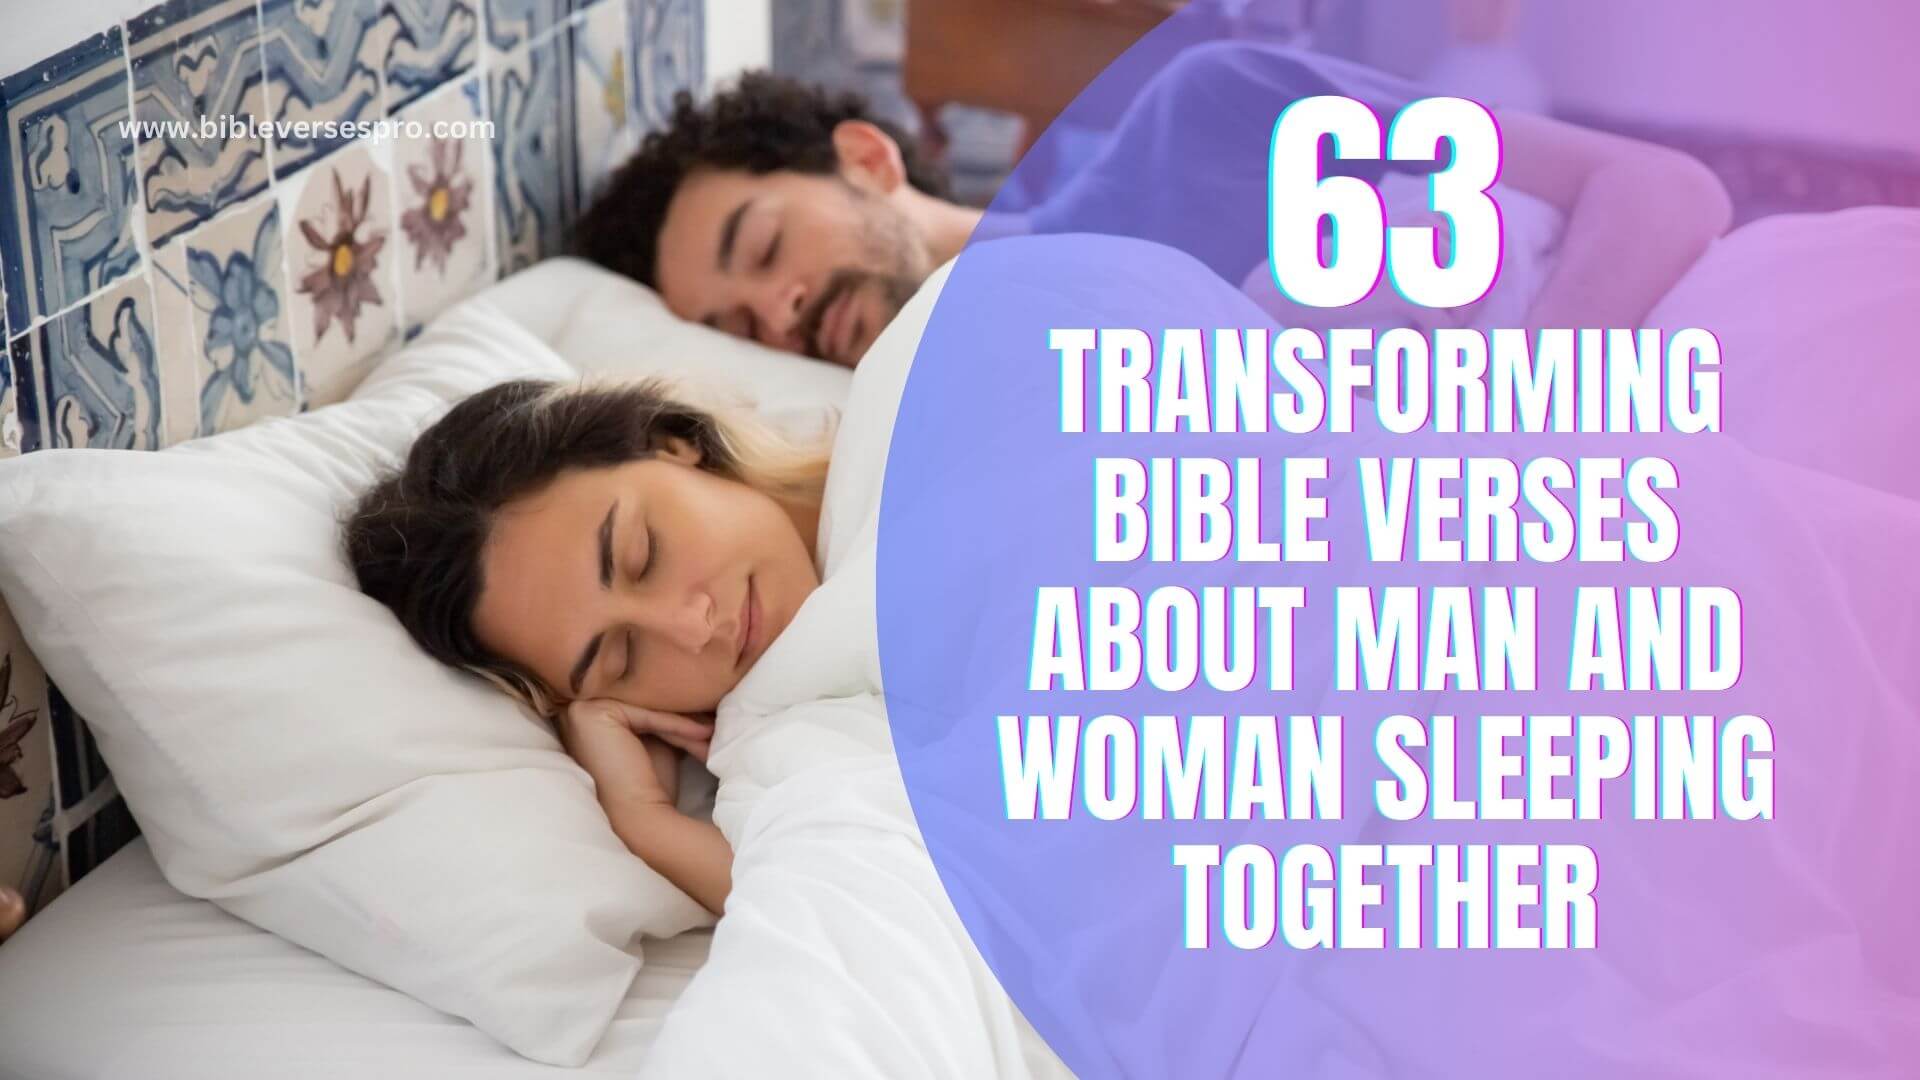 TRANSFORMING BIBLE VERSES ABOUT MAN AND WOMAN SLEEPING TOGETHER (1)